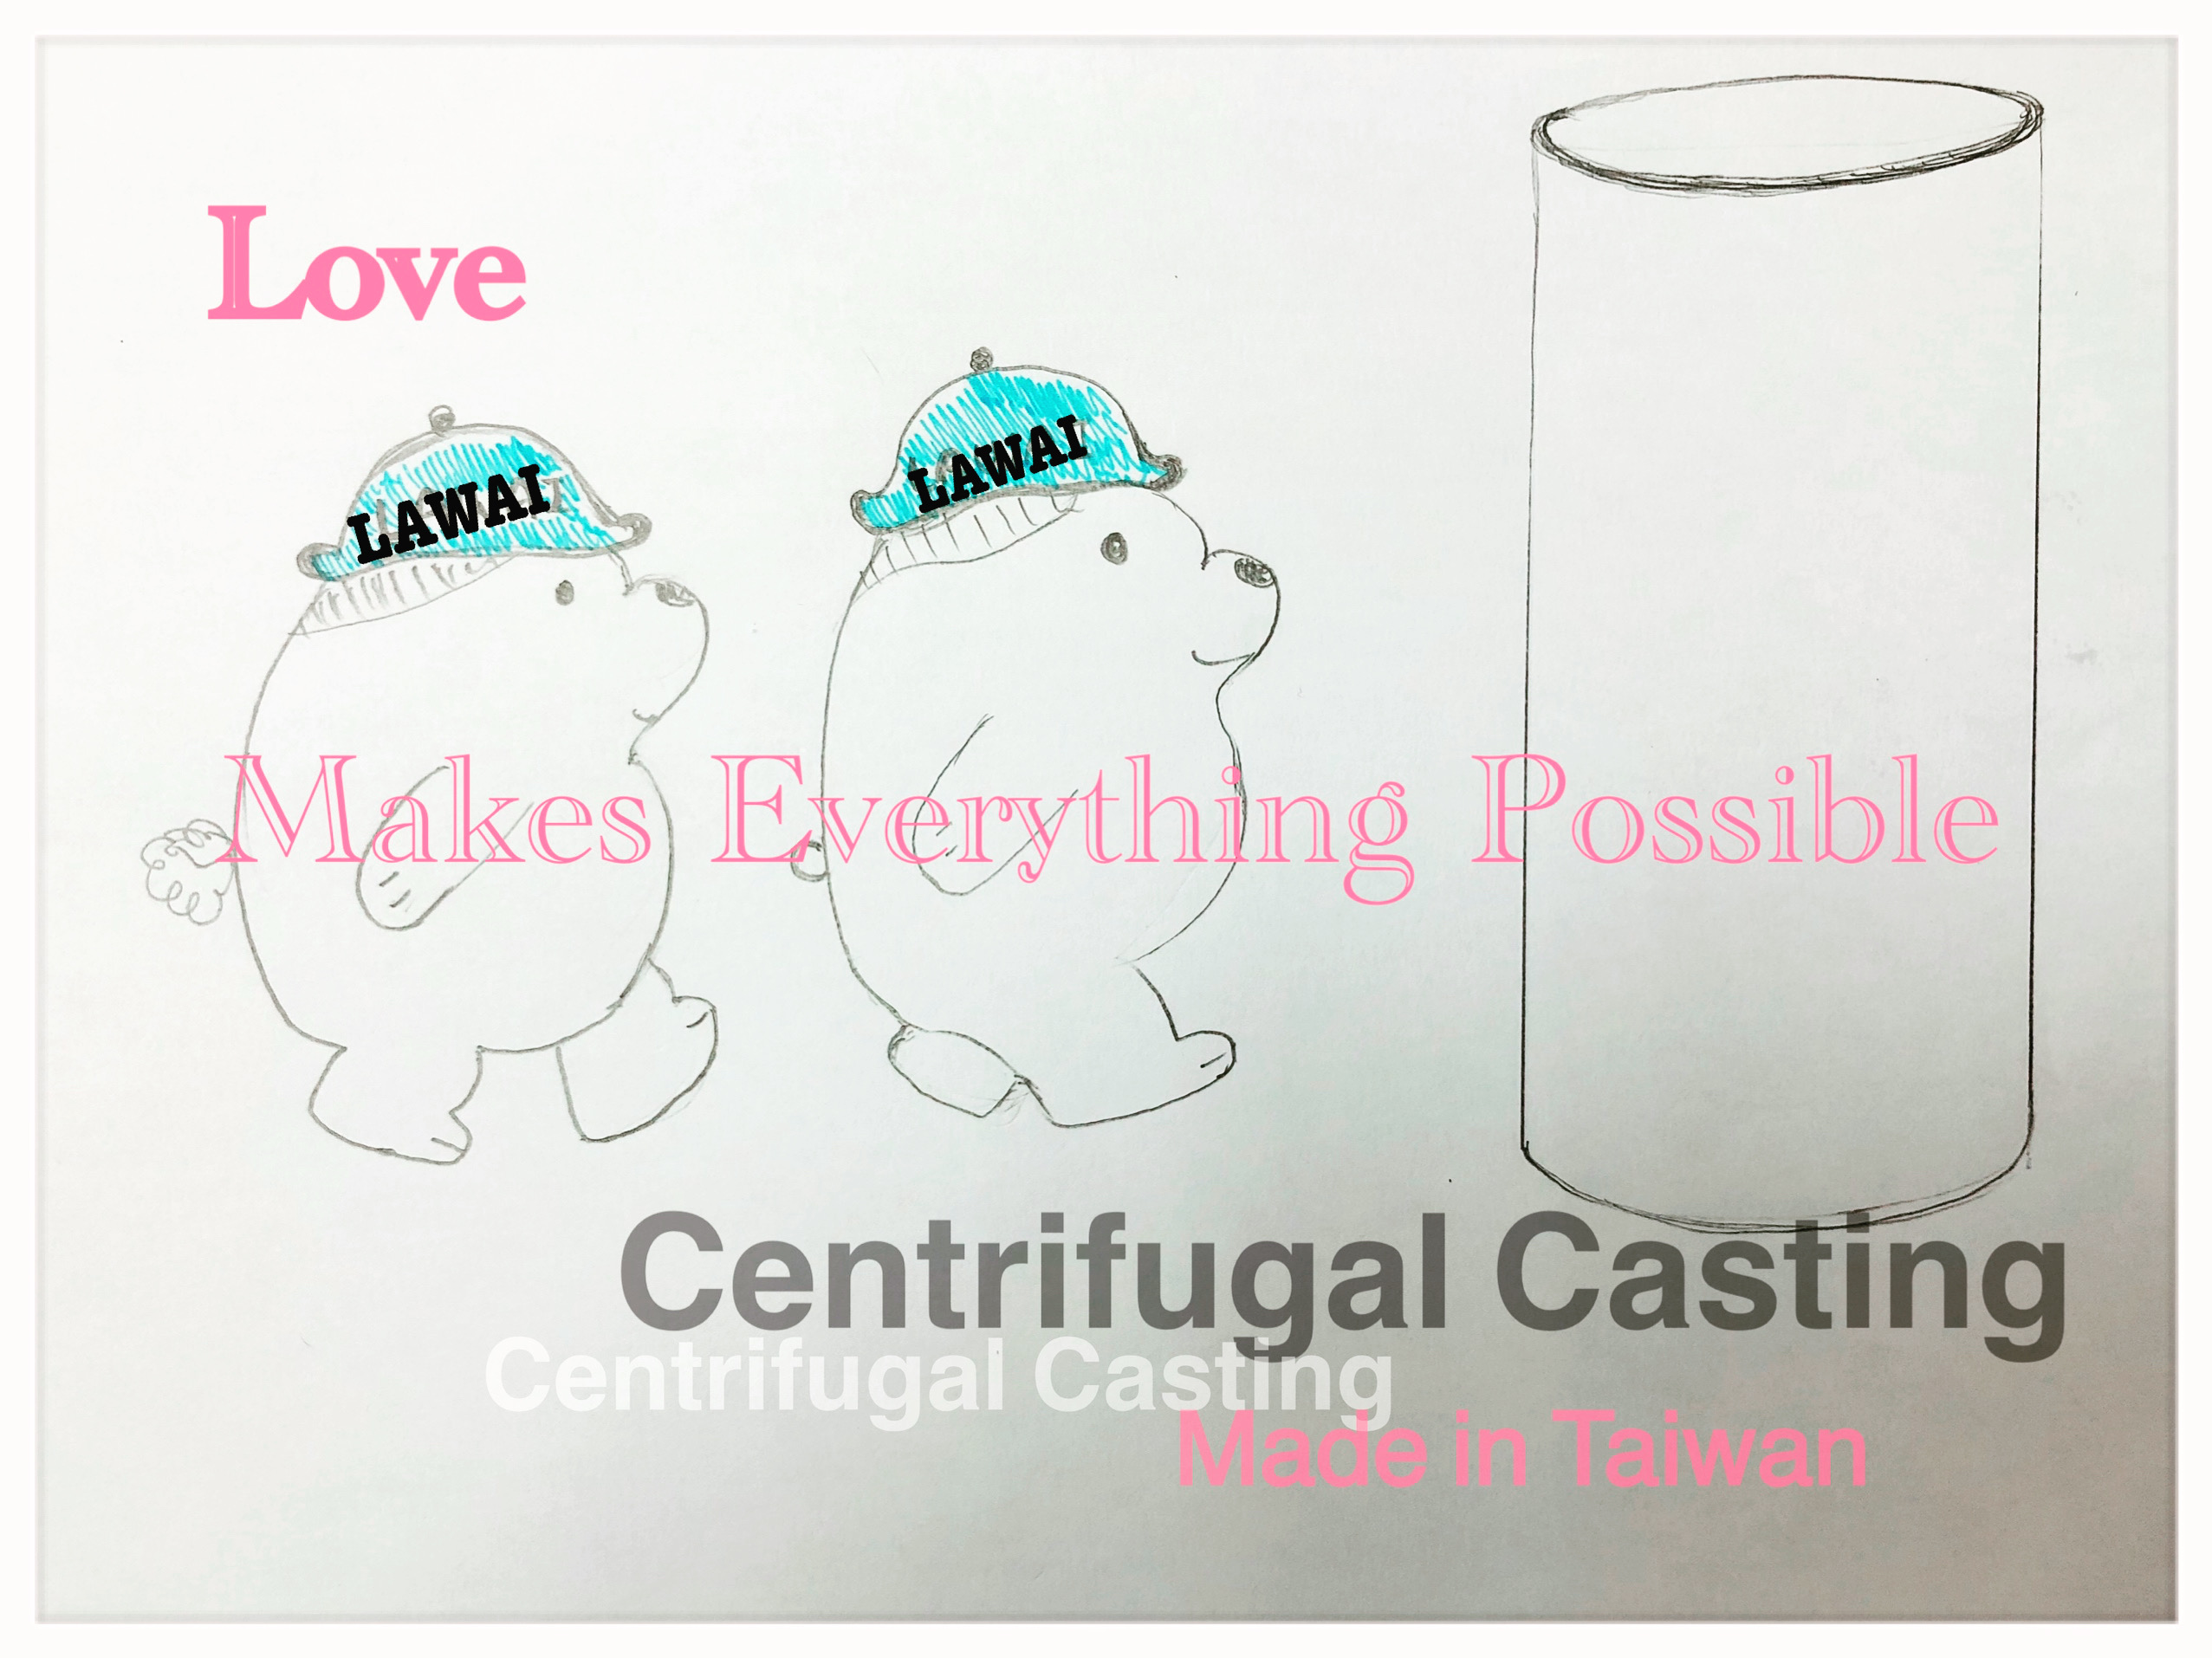 LAWAI INDUSTRIAL CORPORATION is the centrifugal casting tubes and rings foundry